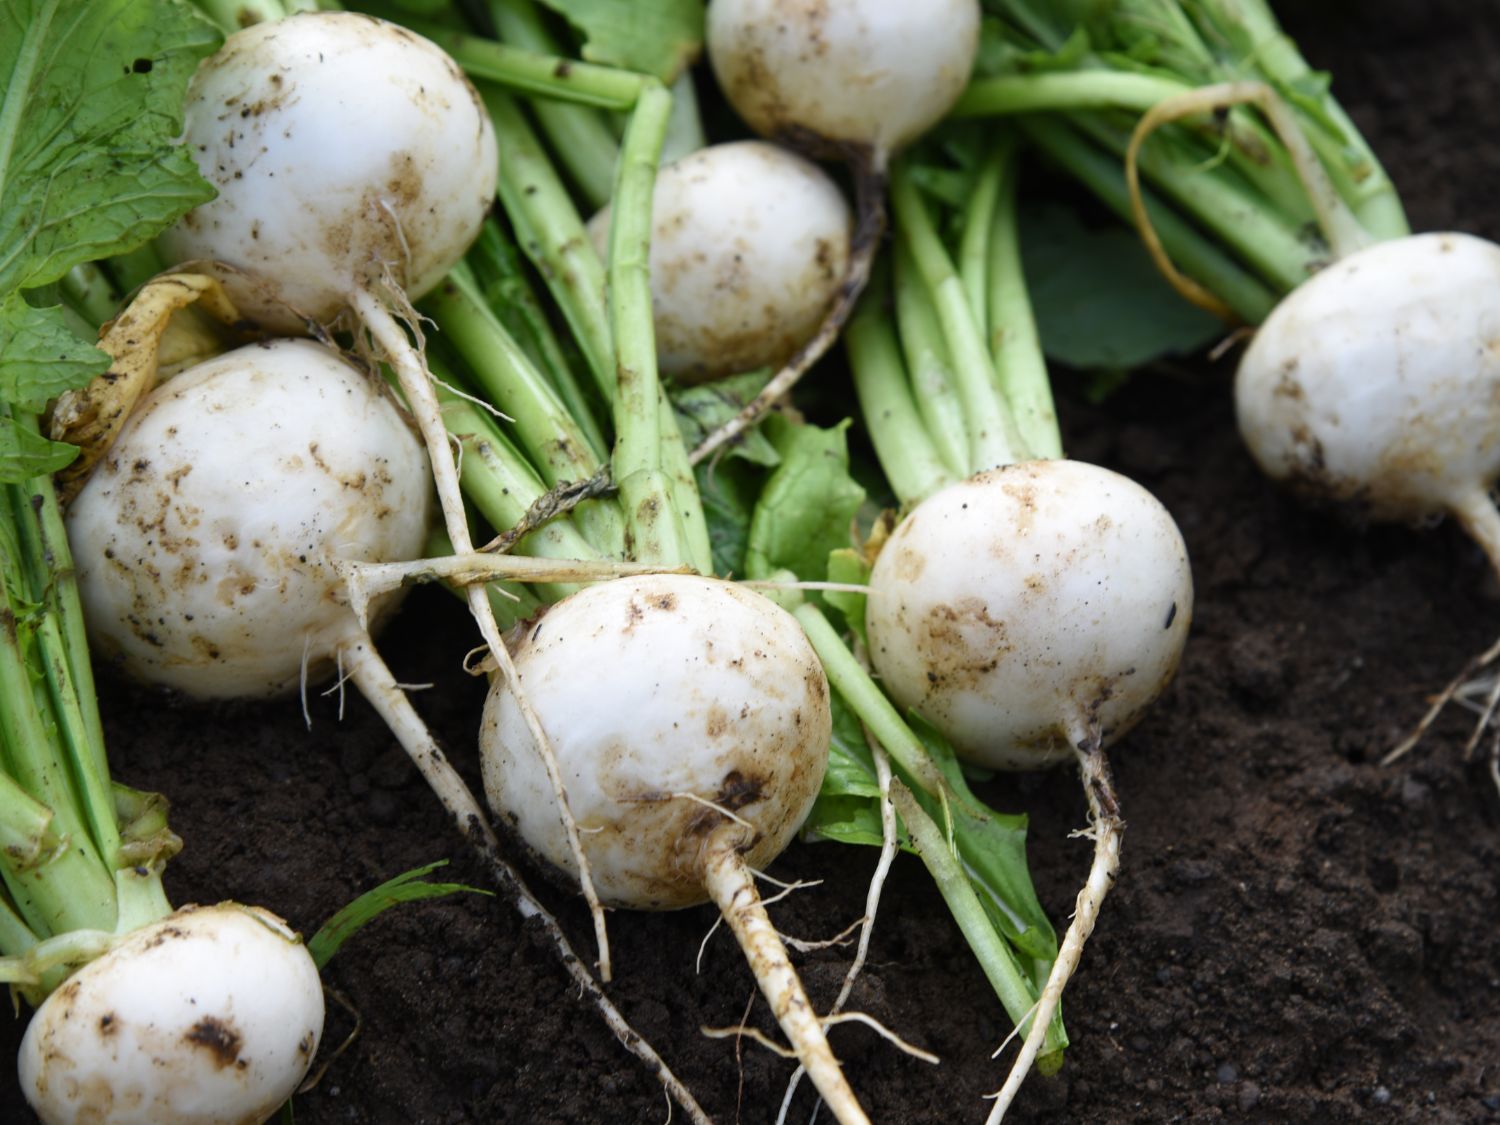 A close up view of fresh picked turnips laying on garden soil